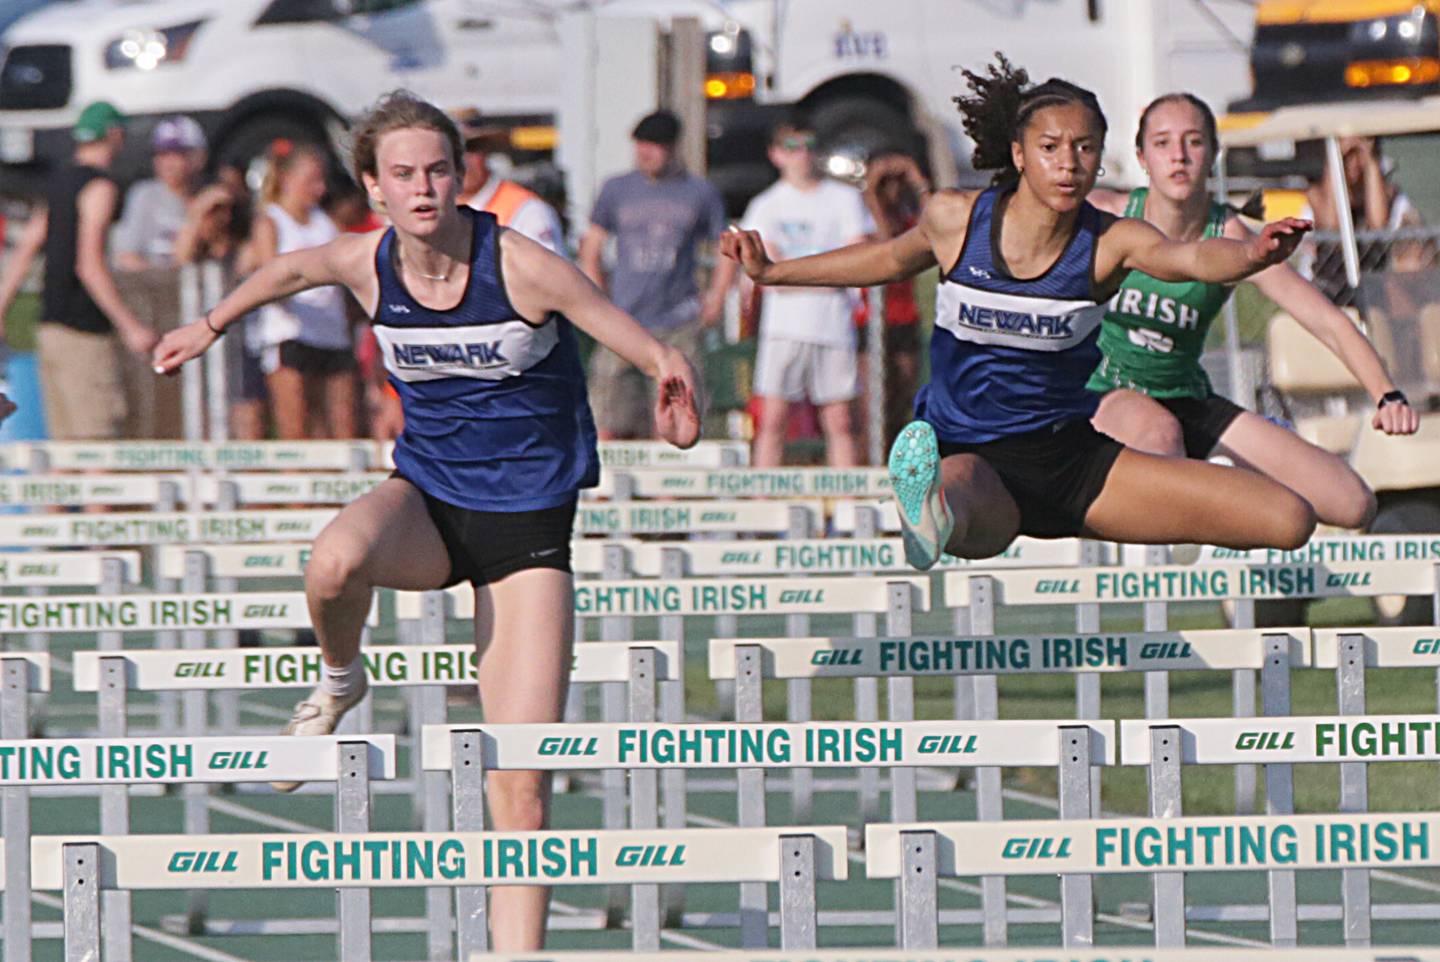 Newark's Megan Williams and Kiara Wesseh compete in the 100 meter hurdles in the Class 1A sectional girls track meet on Thursday, May 12, 2022 in Seneca.